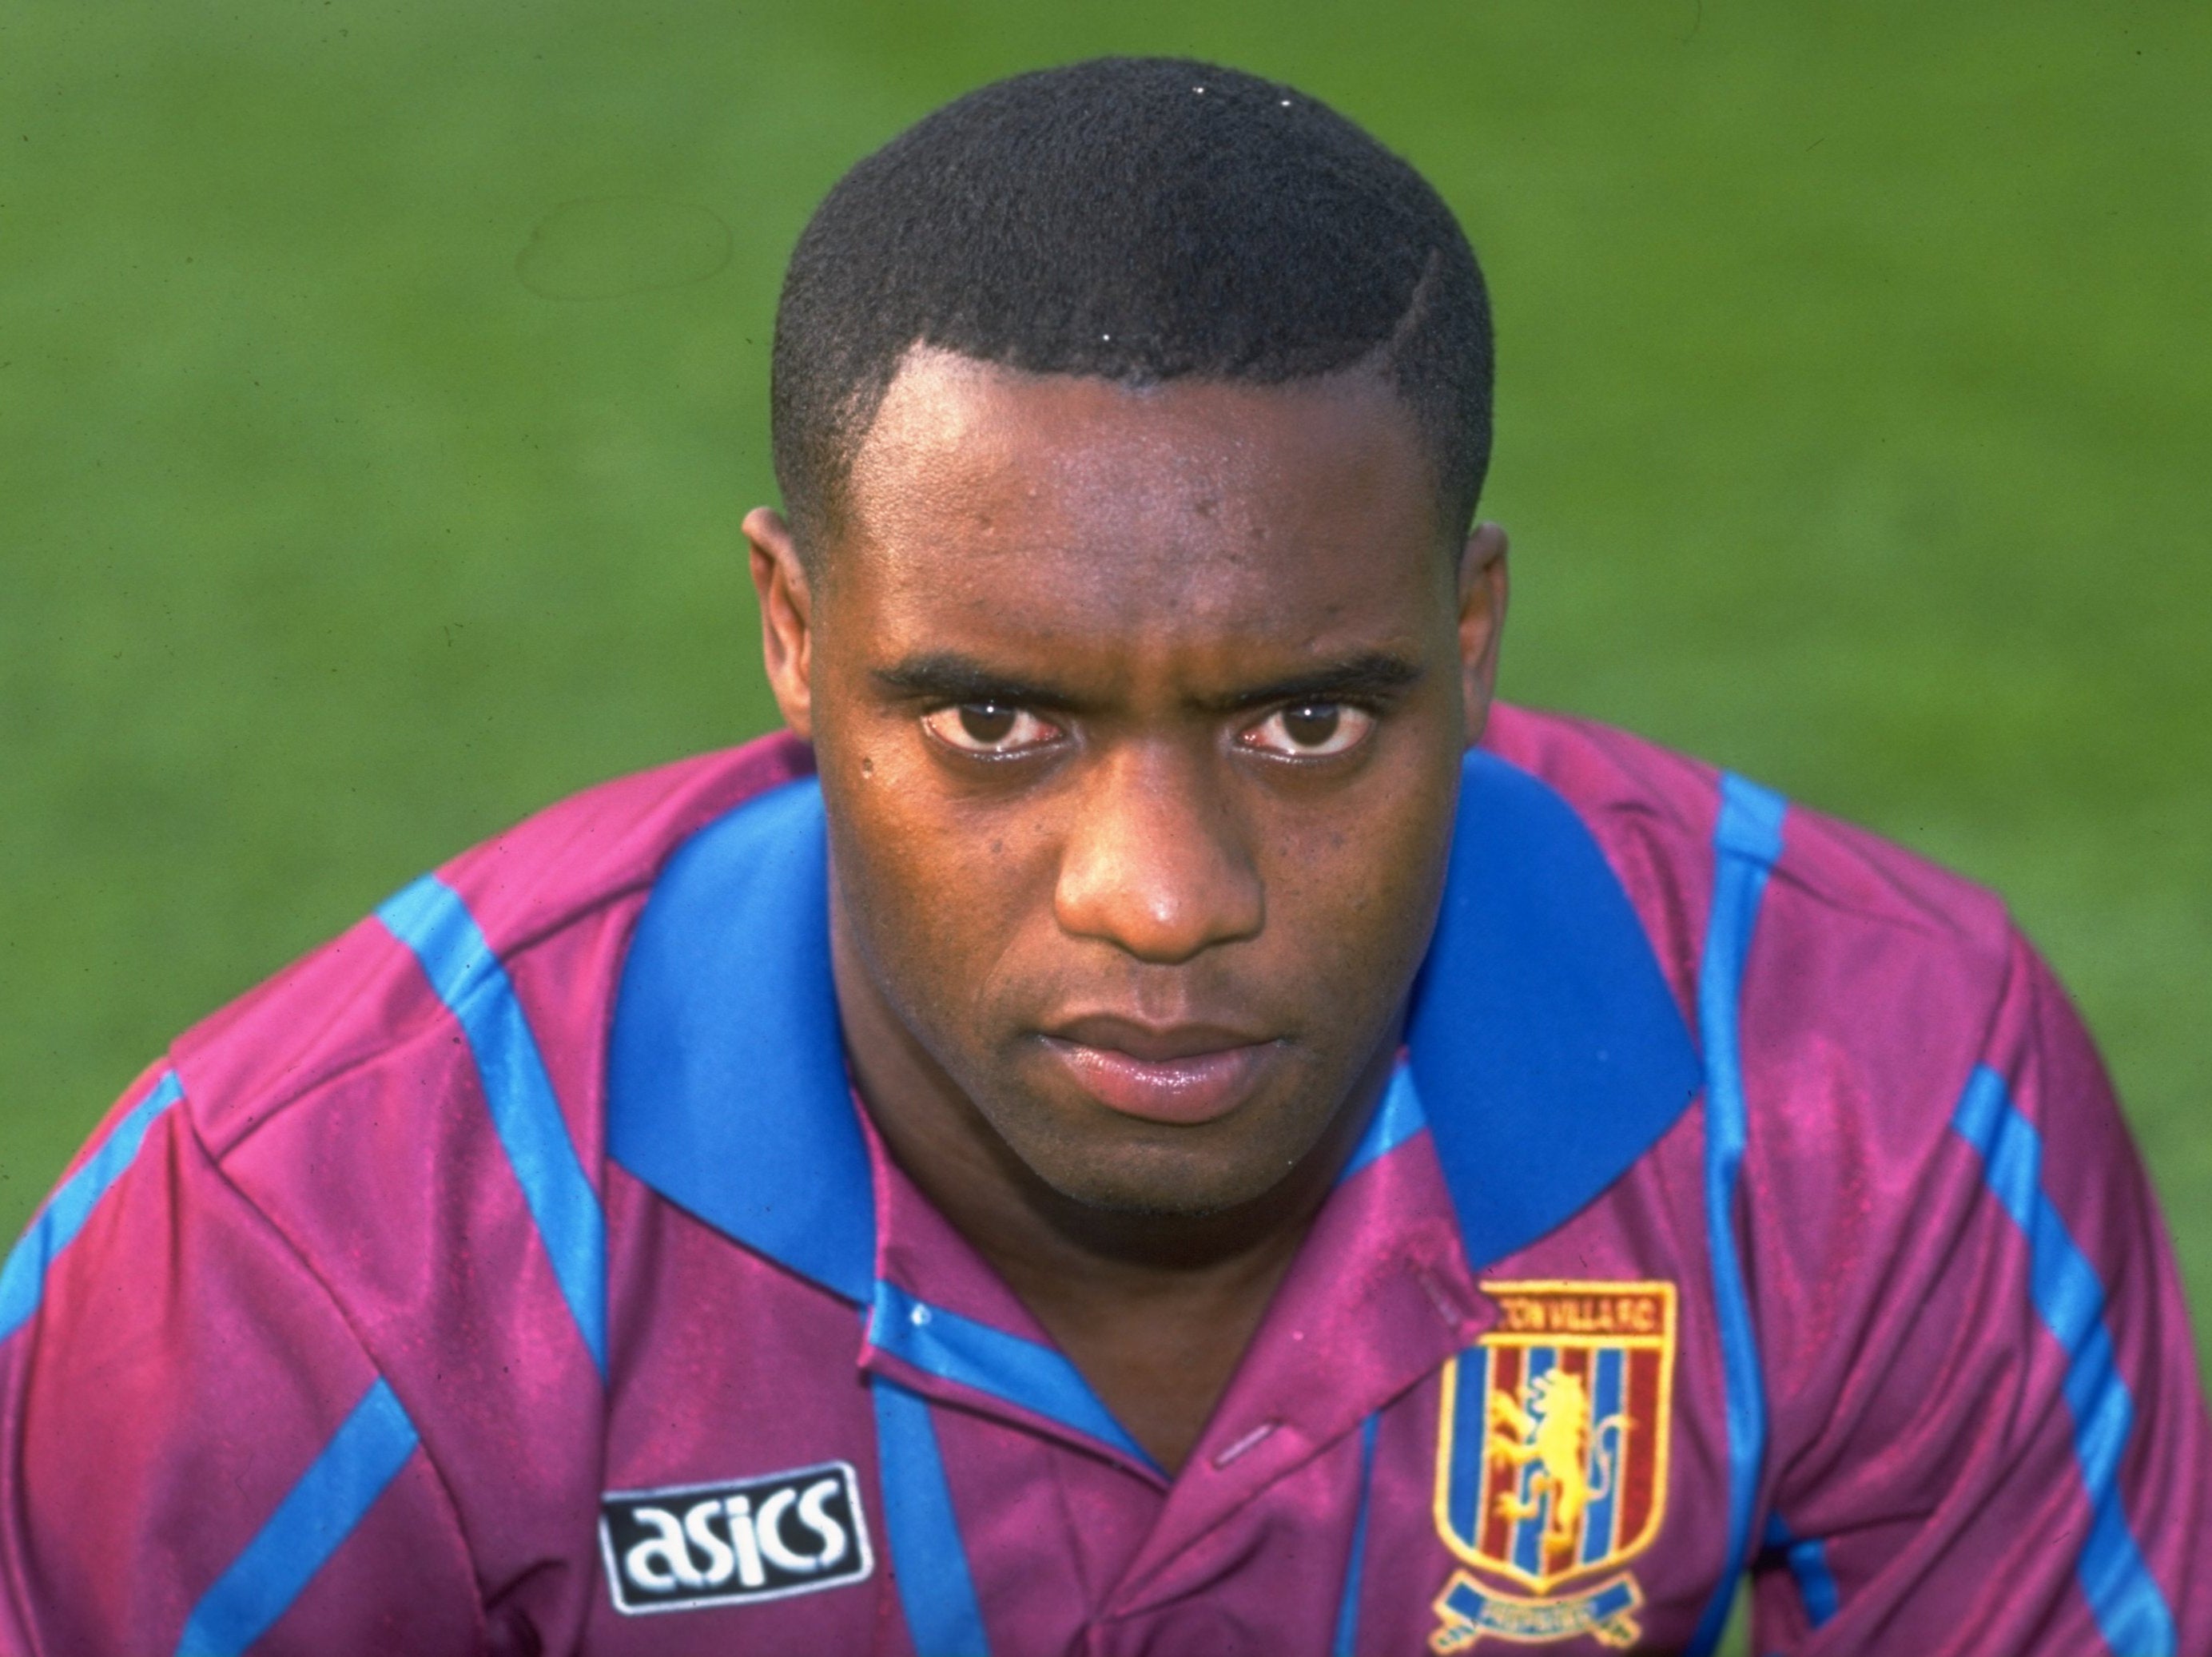 The new head of West Mercia Police has formally apologised to the family of ex-footballer Dalian Atkinson for his killing